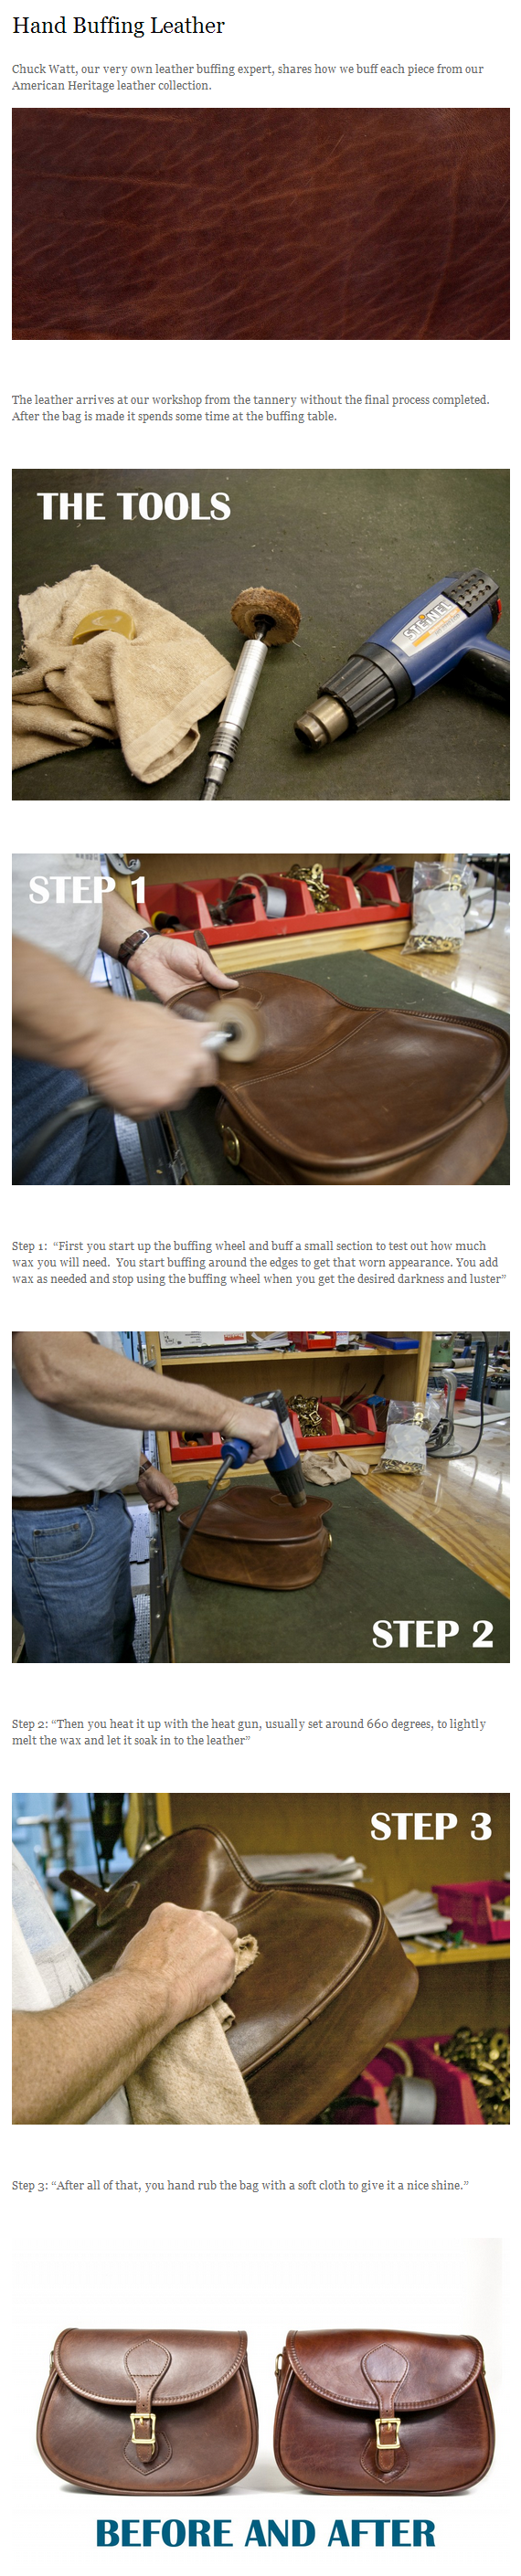 Hand Buffing Leather